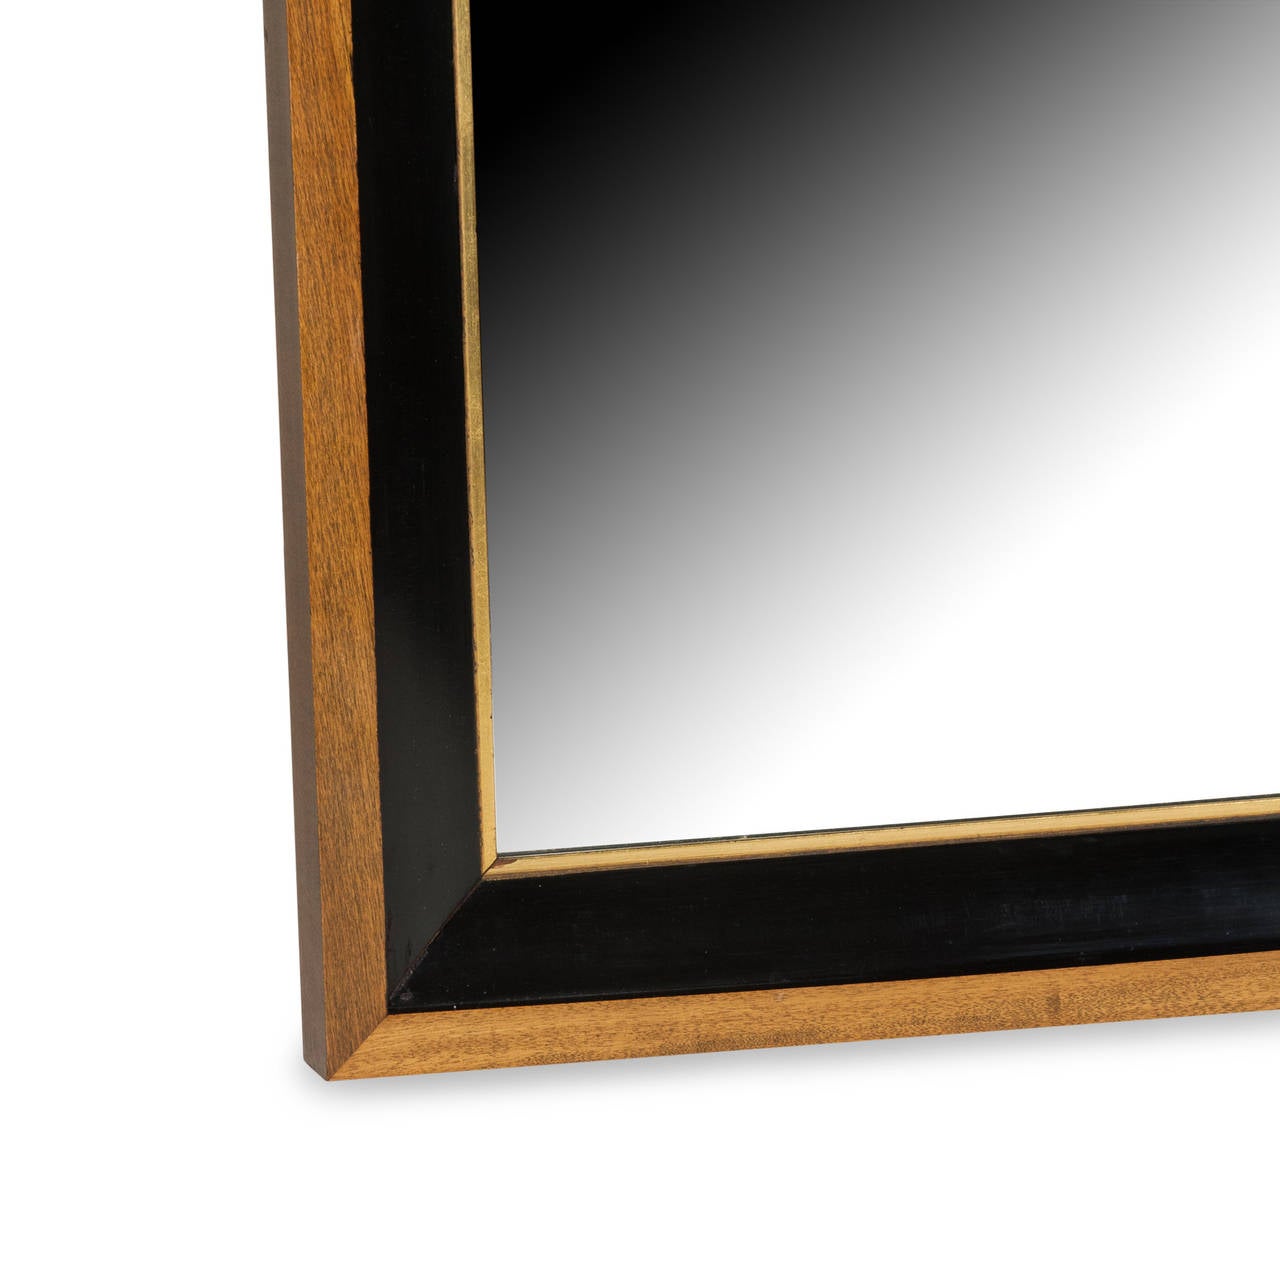 Mahogany and ebonized rectangular frame mirror, outer mahogany border with ebonized curved well, giltwood detail surrounding mirrored glass, American, 1960s. Measures: Height 27 in, width 23 in and depth 1 3/4 in. (Item #2308 sats)

Note: Minor